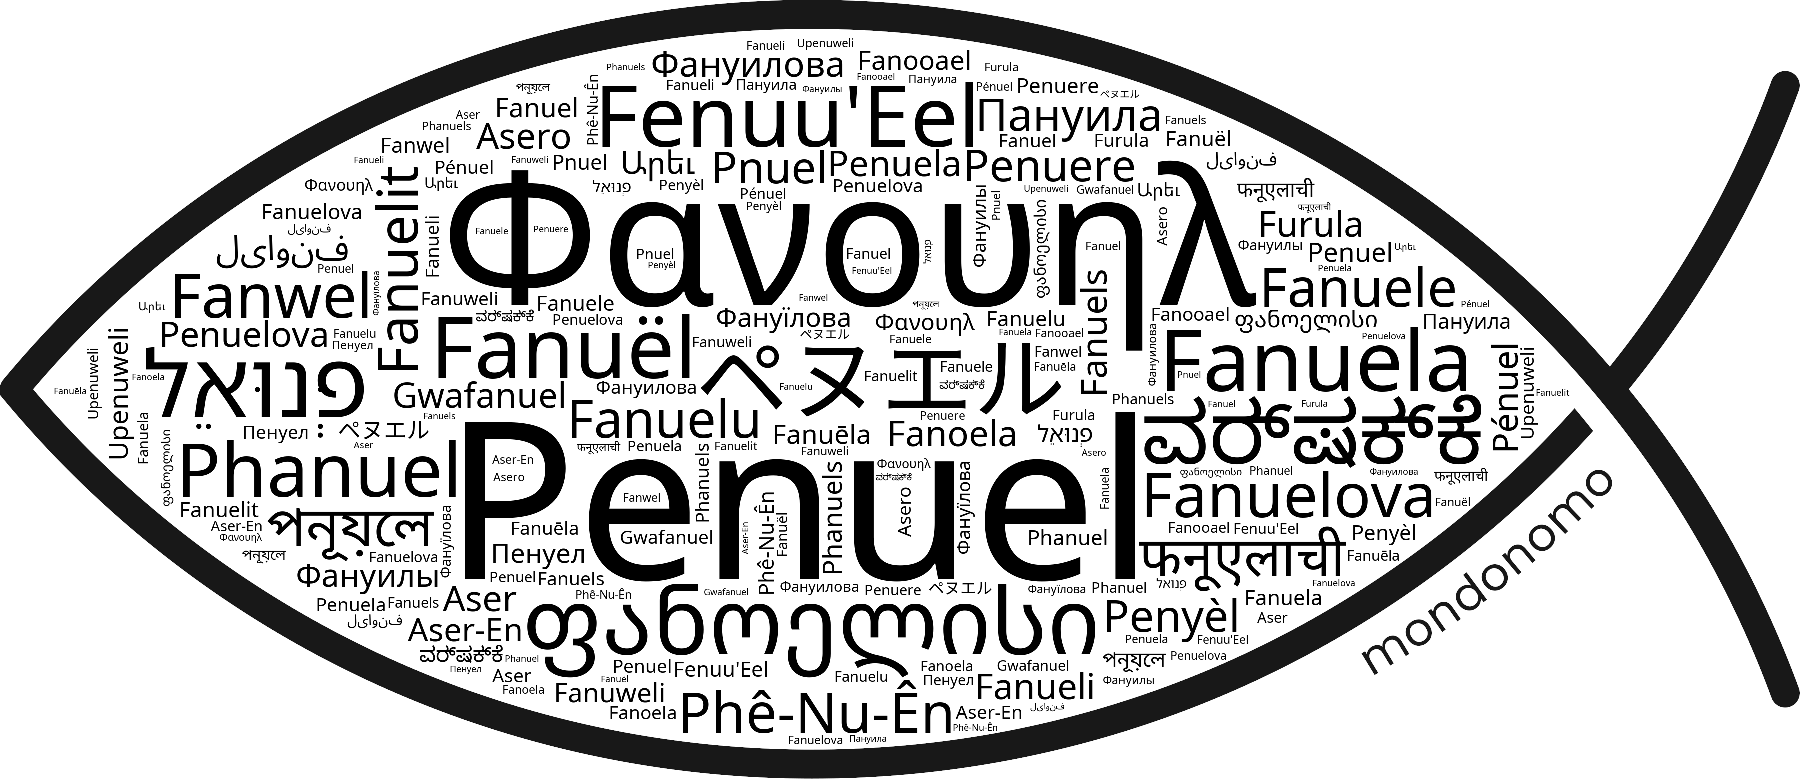 Name Penuel in the world's Bibles